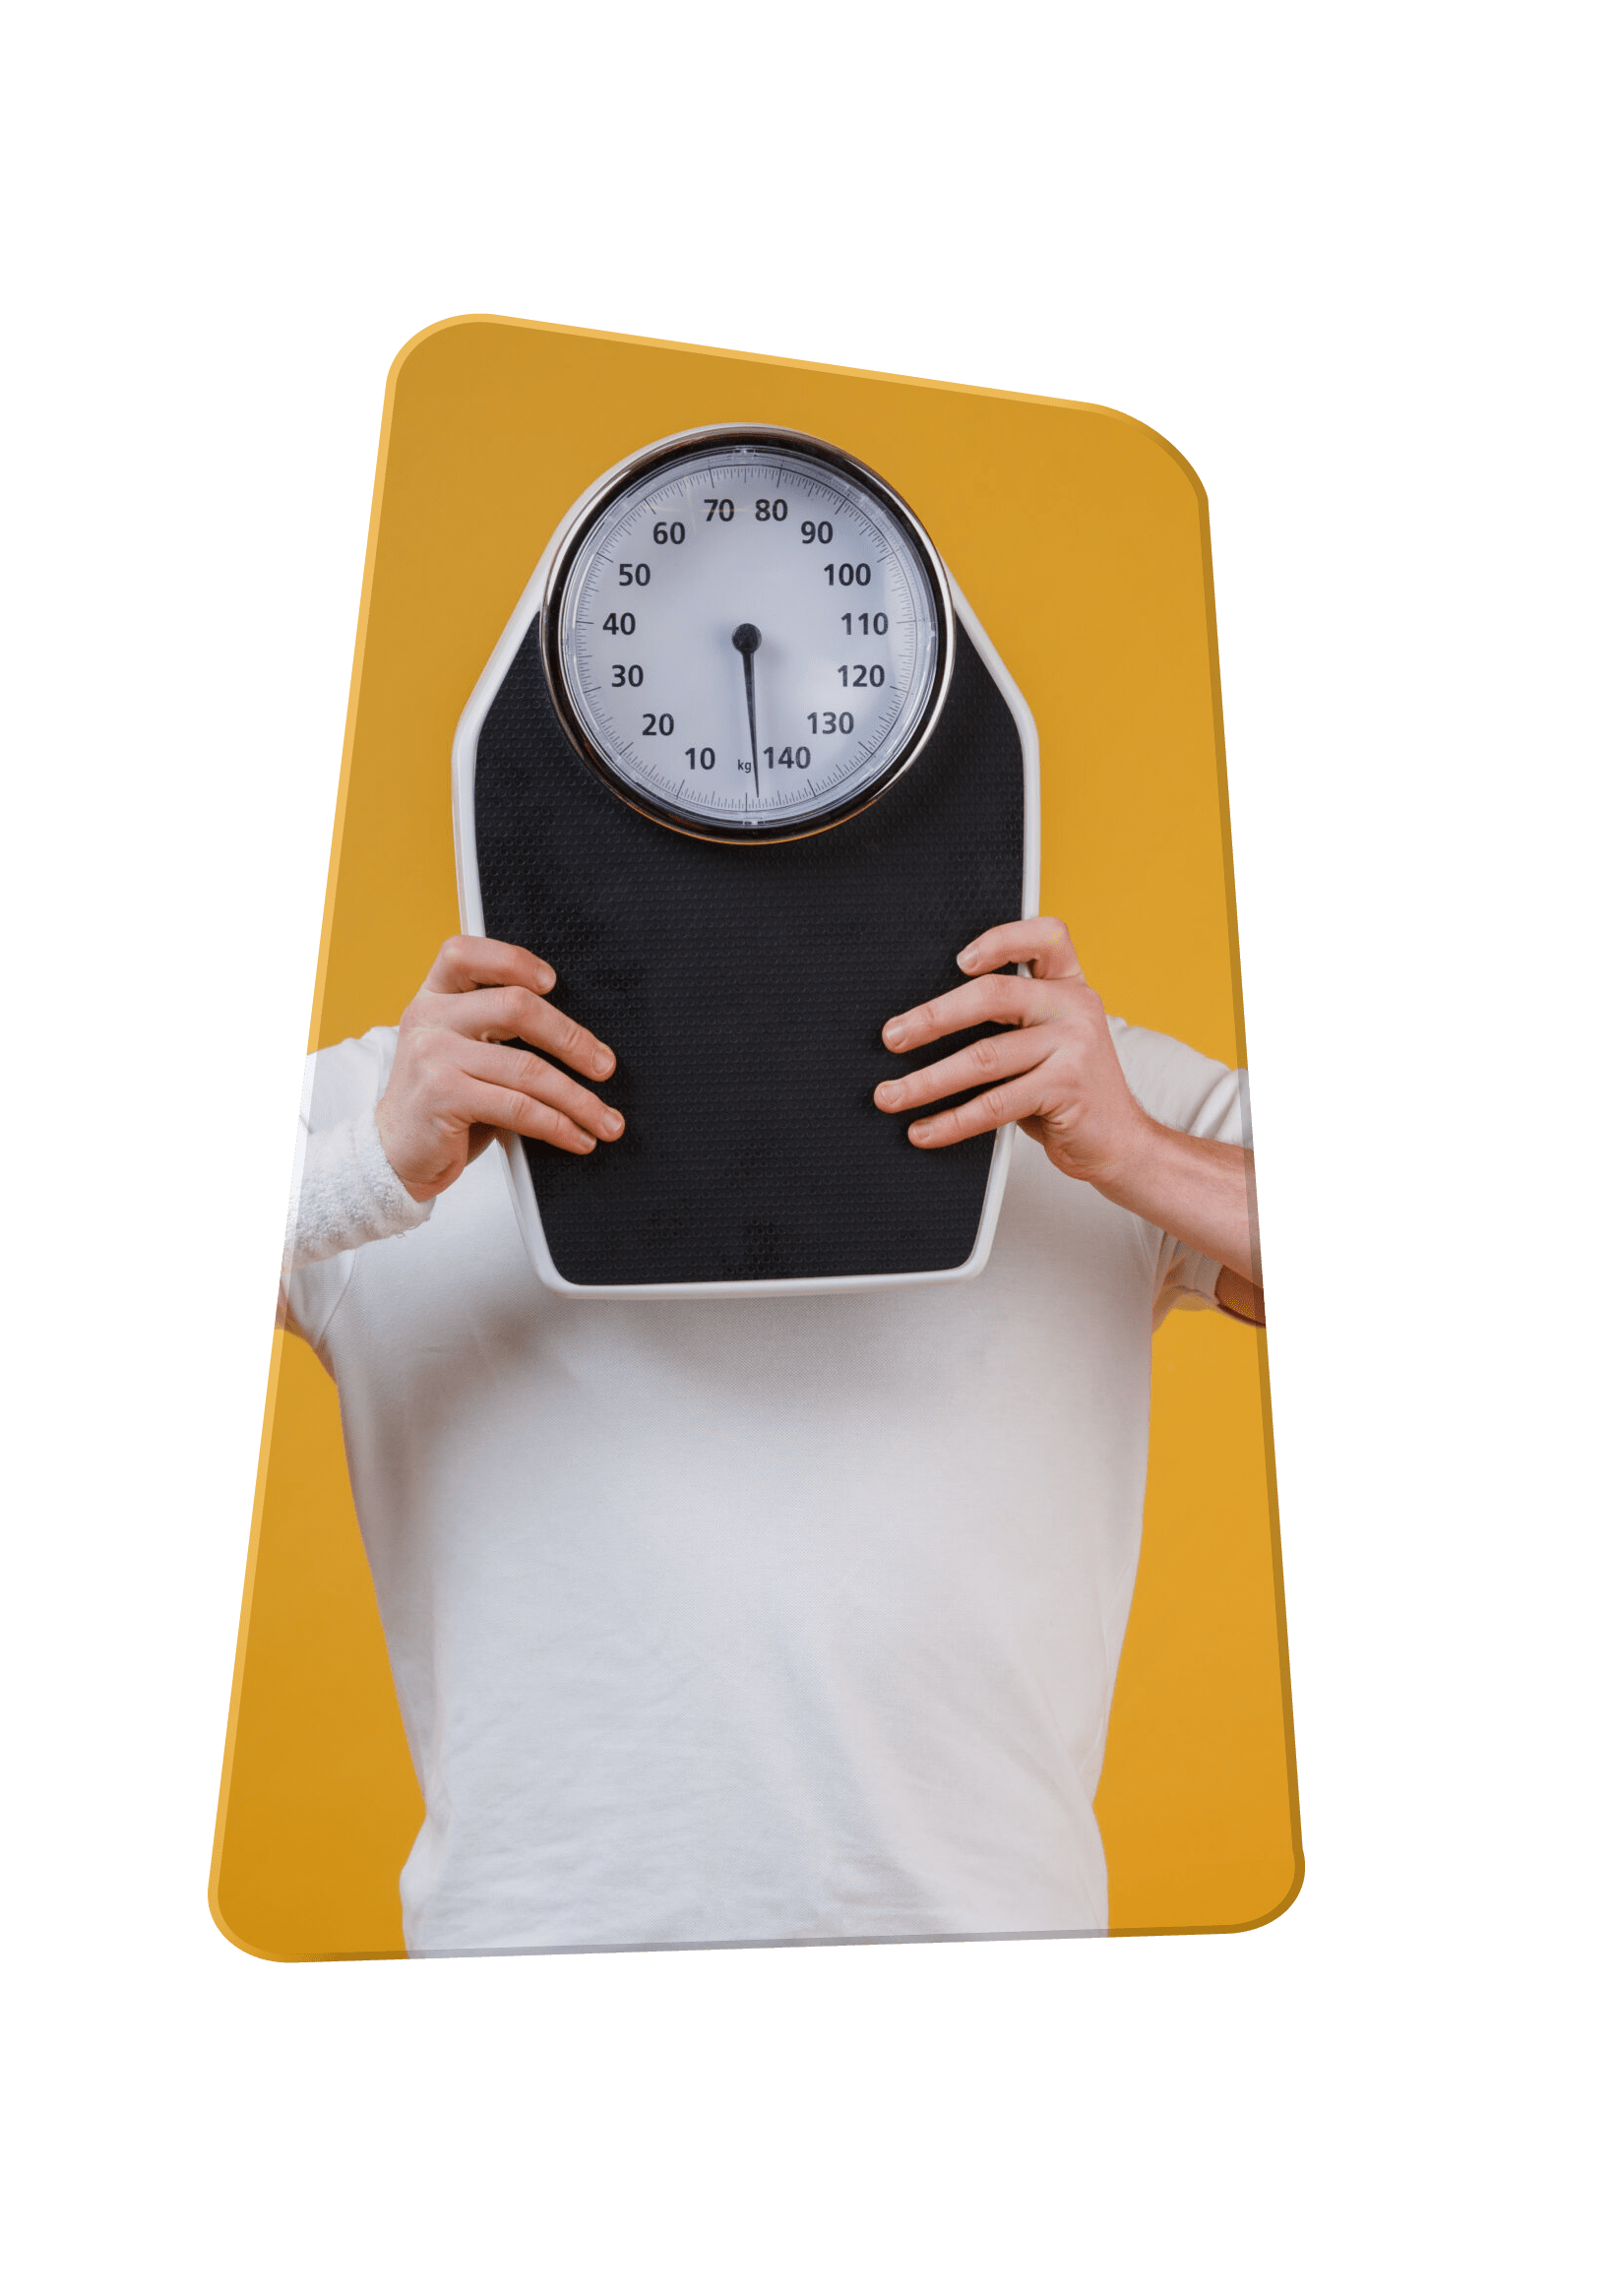 young-sports-man-hiding-face-weight-scales-scaled-01-min (1)